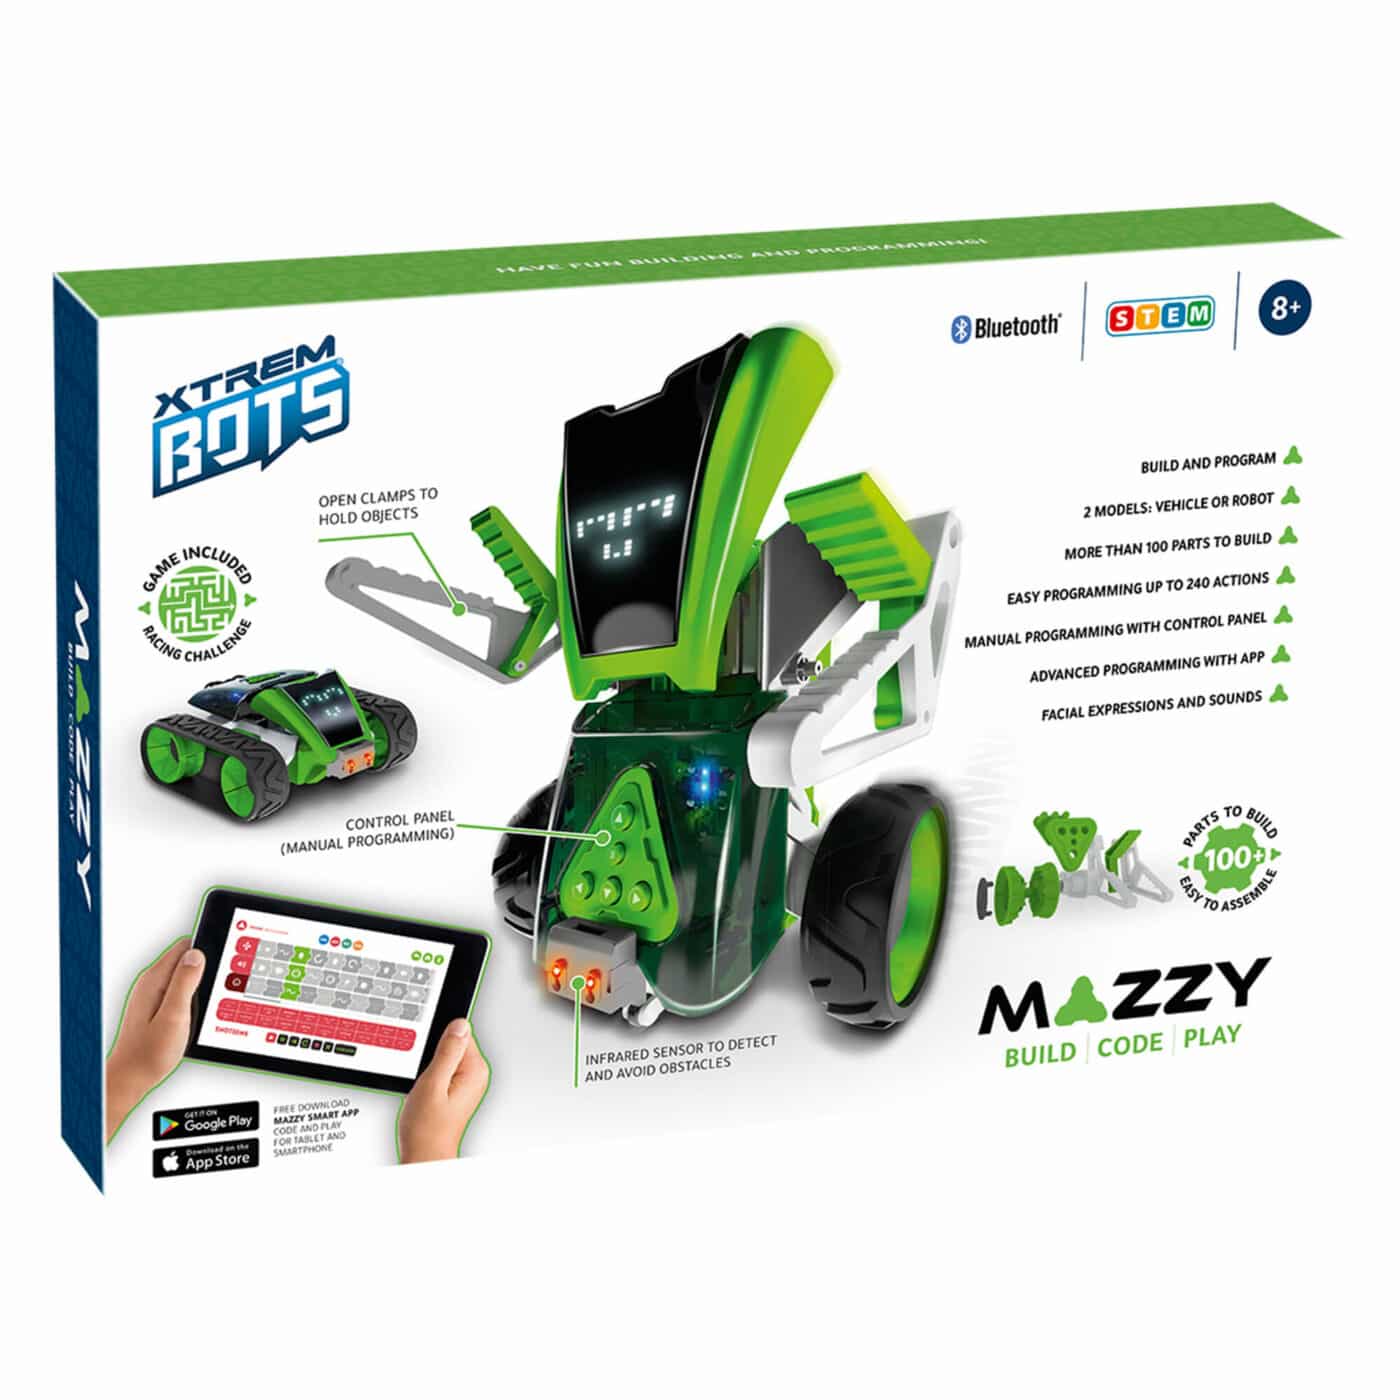 Xtrem Bots - Mazzy Coding Robot with Bluetooth-6